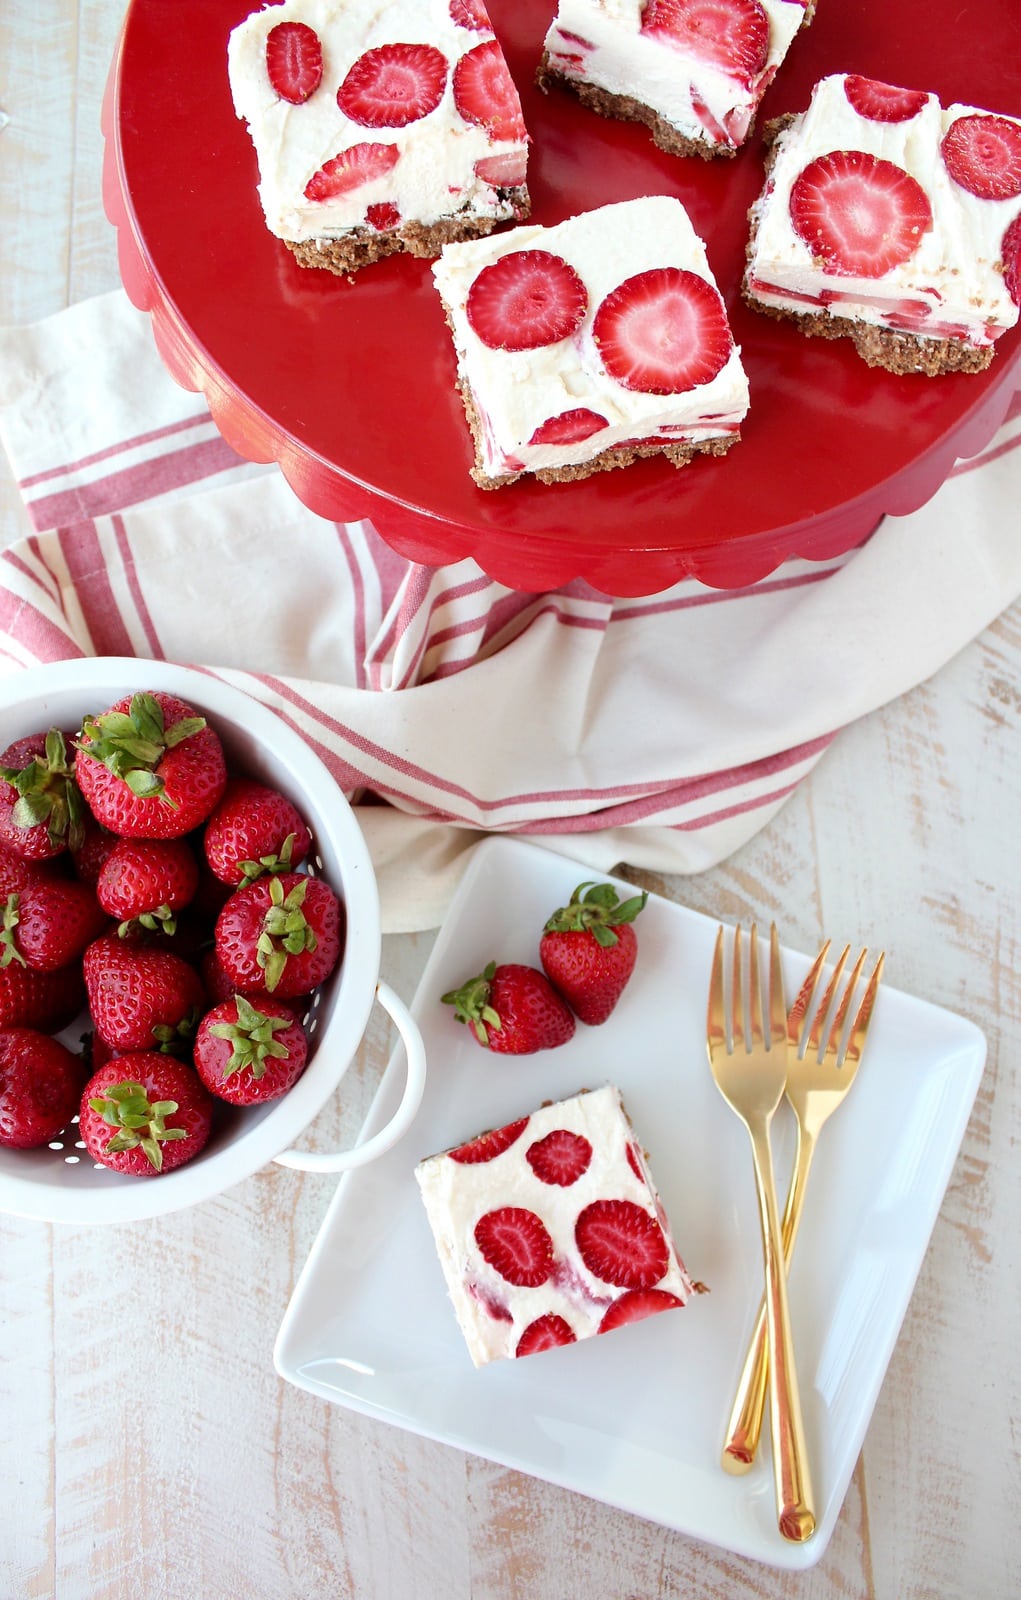 strawberry cheesecake bars on red serving tray and on white plate with gold forks